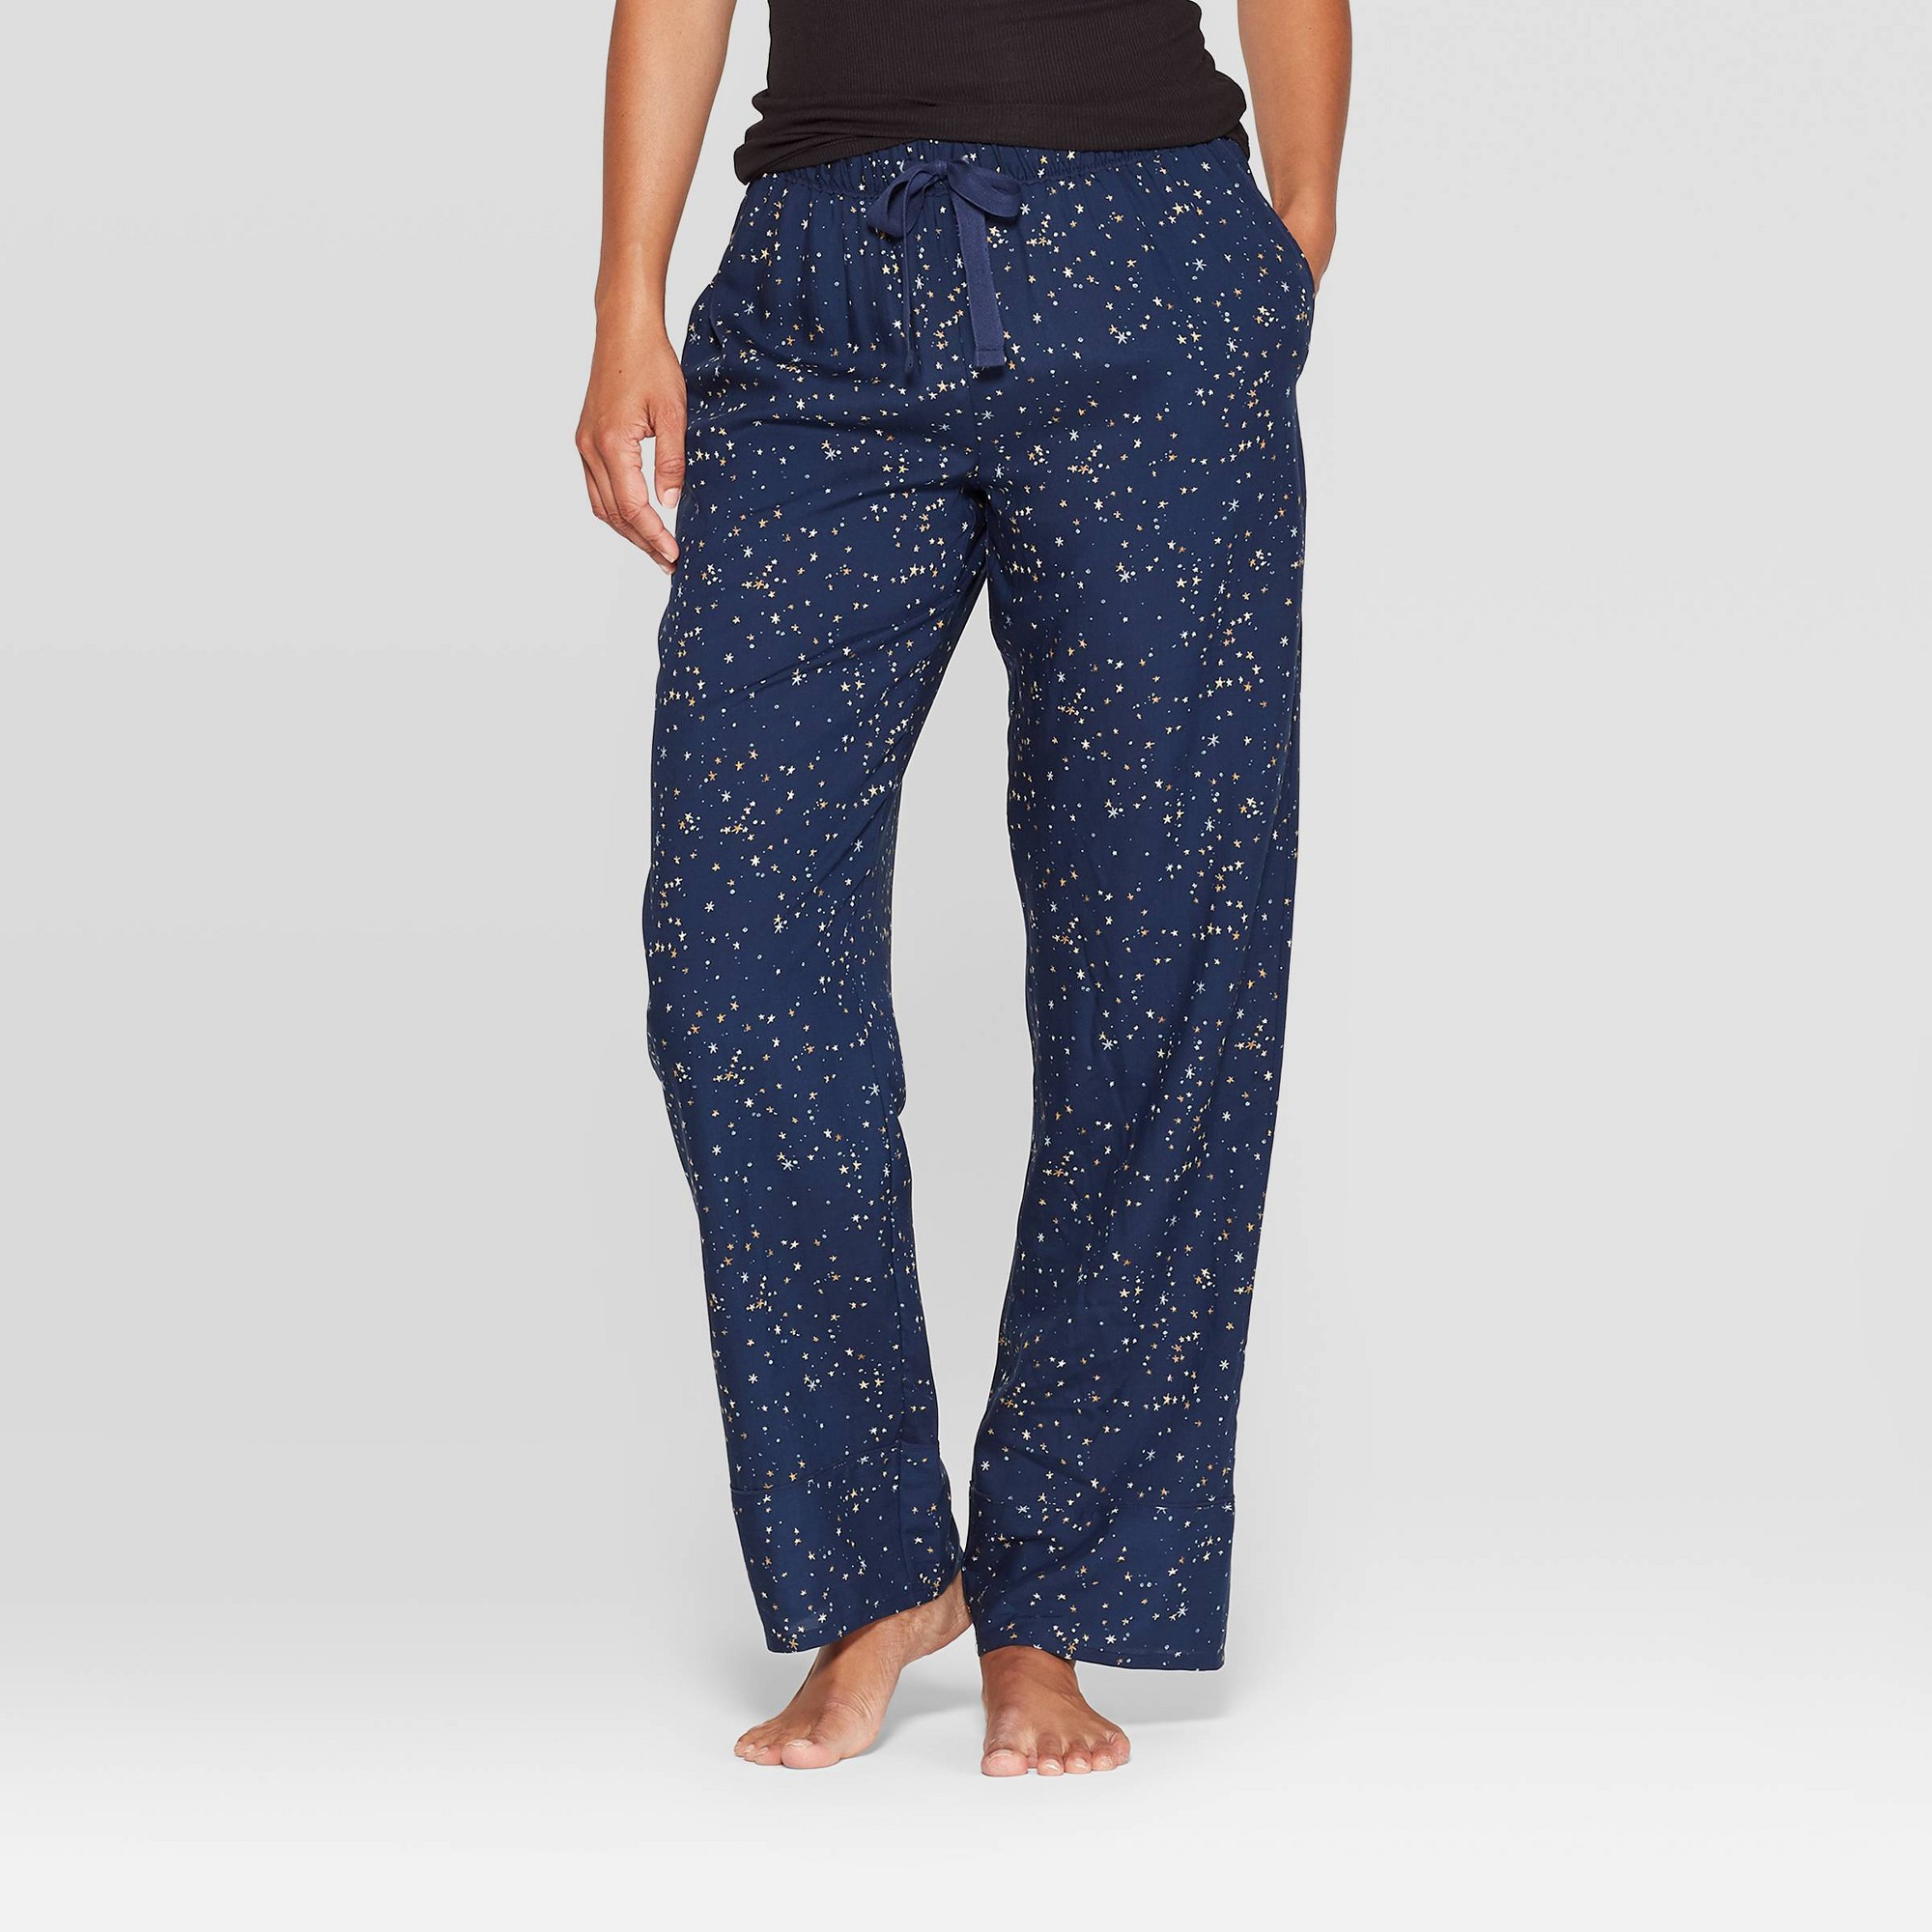 Women's Star Print Simply Cool Pajama Pants - Stars Above Navy XS, Women's,  Blue, by Stars Above